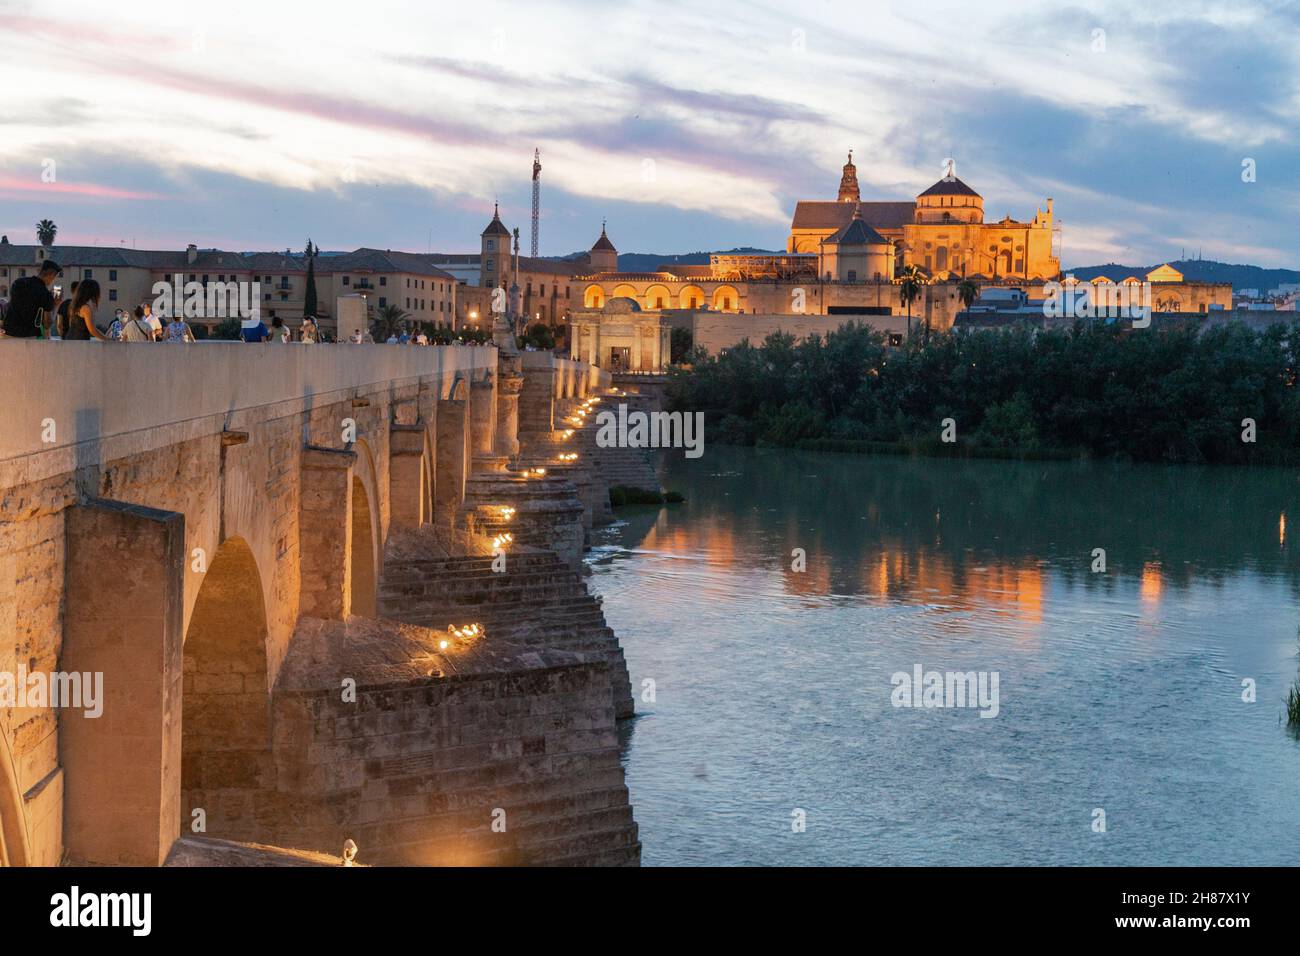 View of the Roman Bridge of Cordoba and the Mosque in the background with people walking in the blue hour of the day Stock Photo